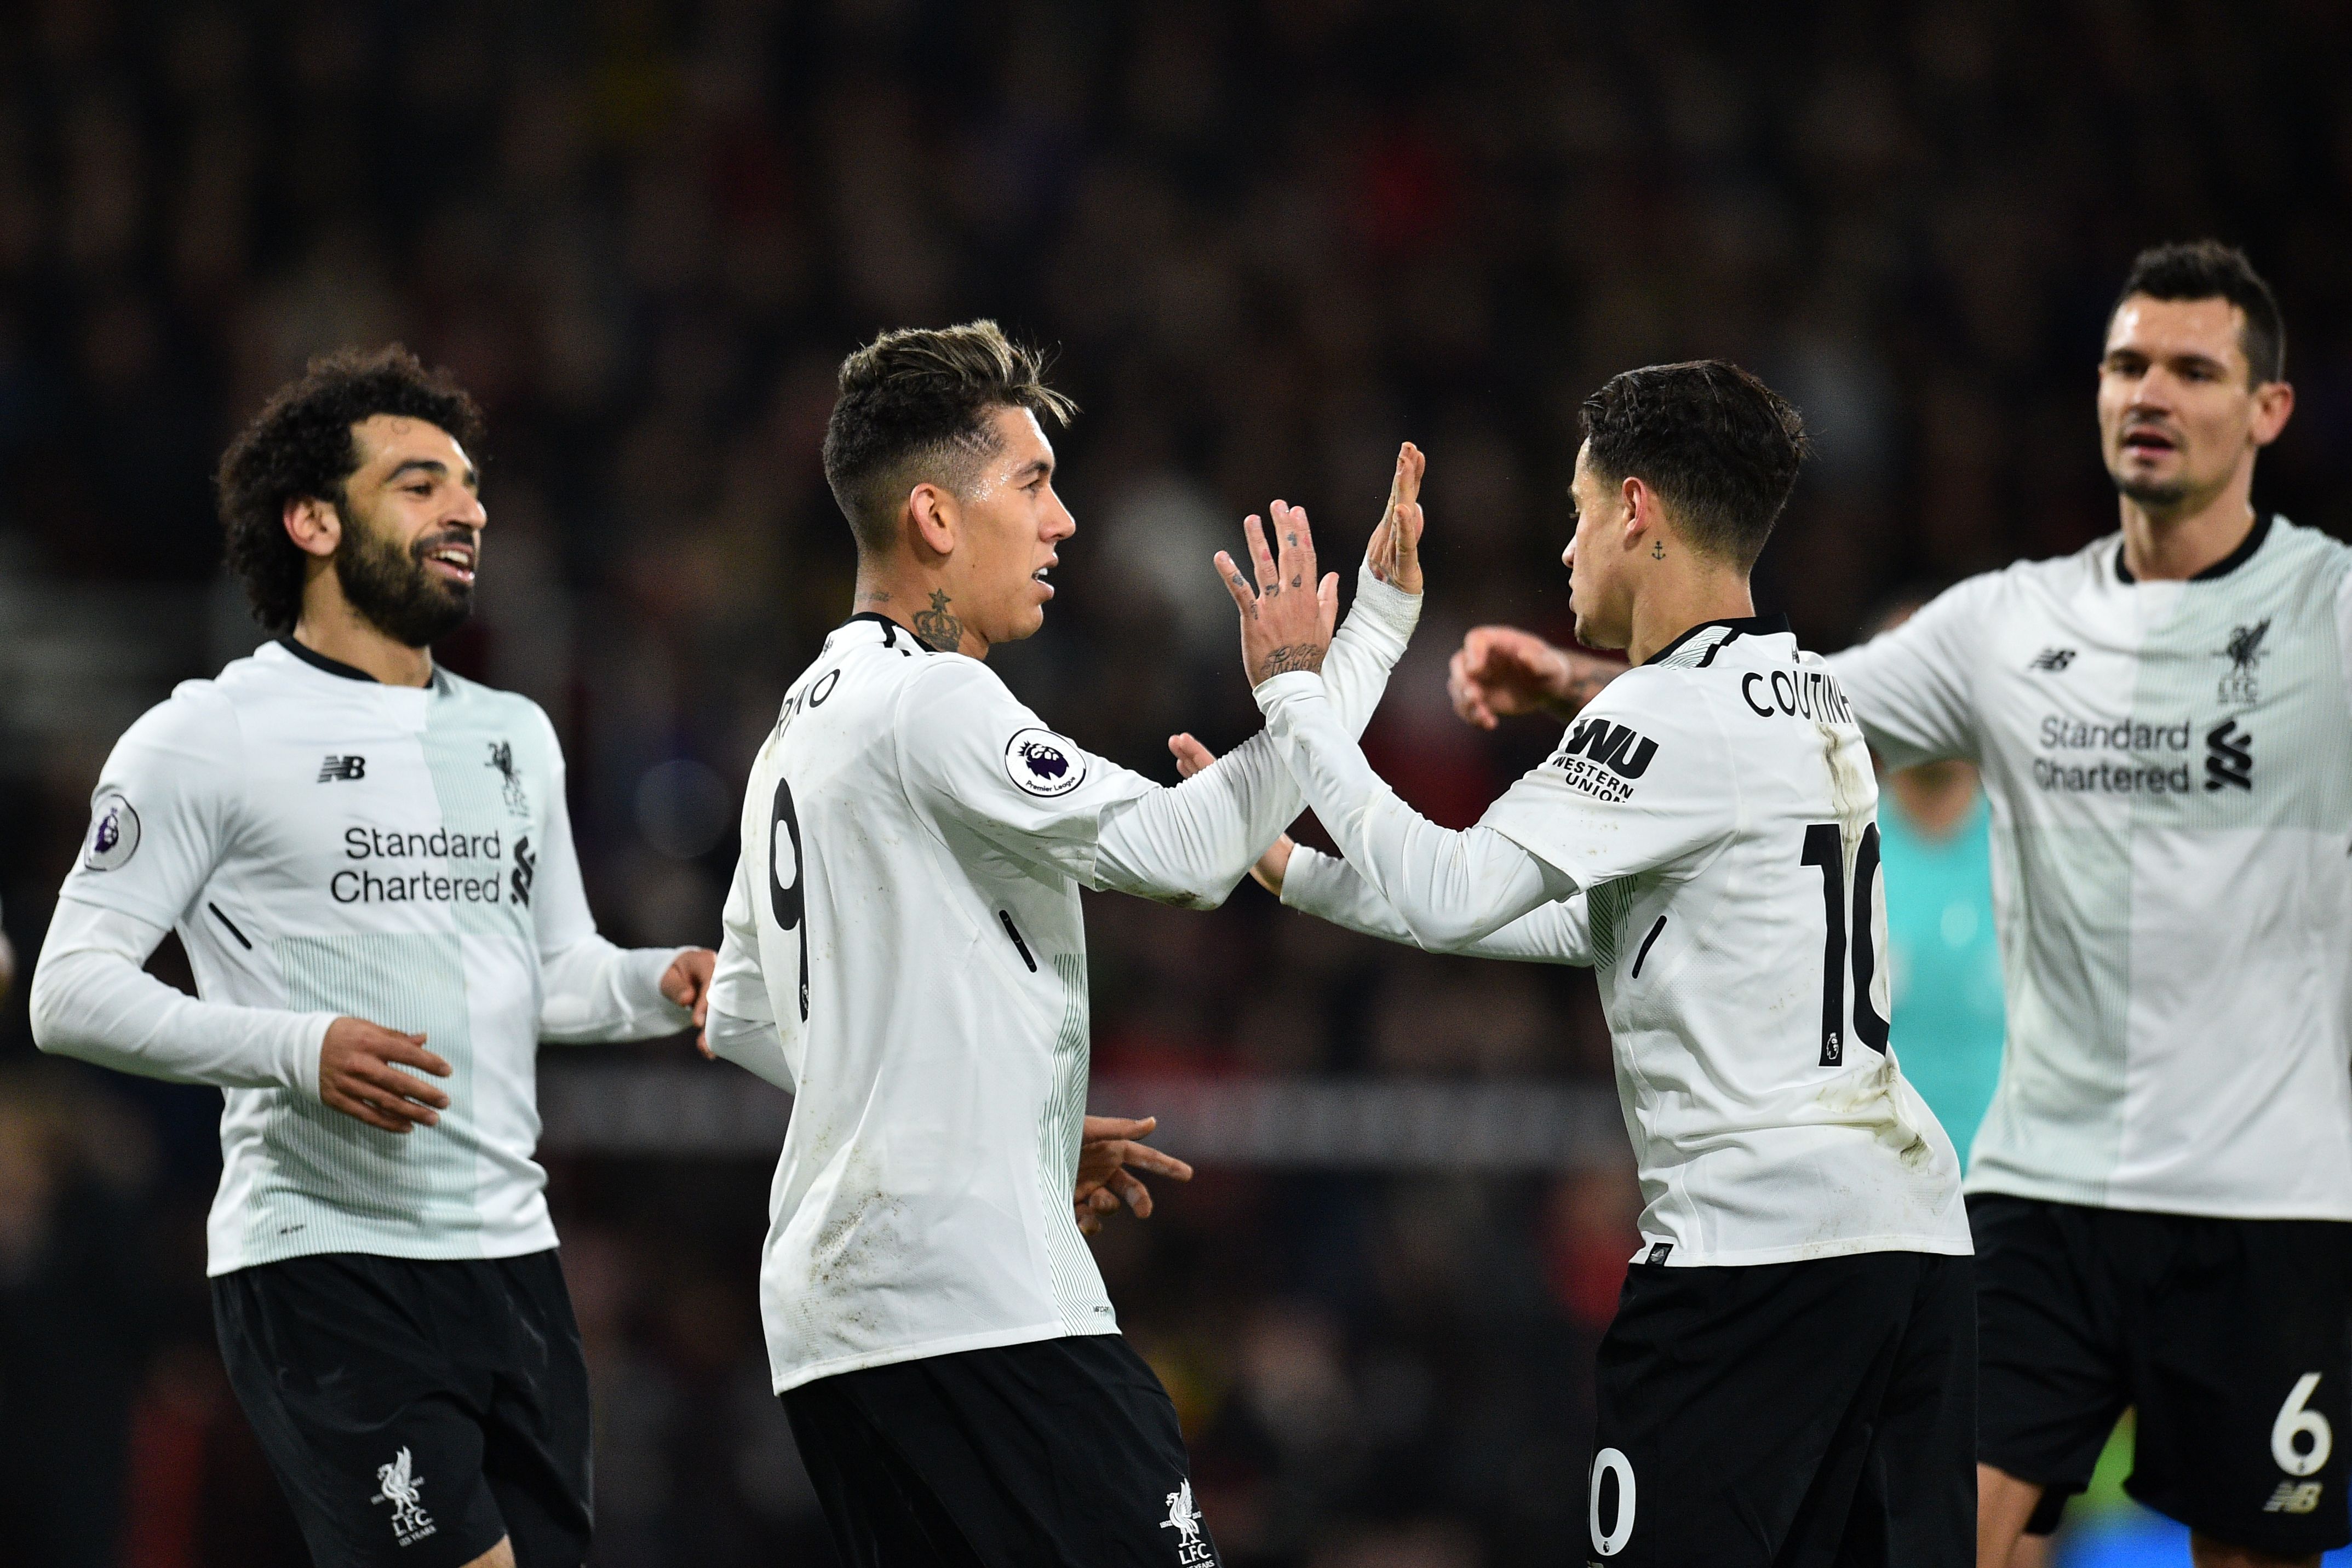 Liverpool's Brazilian midfielder Roberto Firmino (2nd L) celebrates with the game's other goal-scoreres, Liverpool's Egyptian midfielder Mohamed Salah (L), Liverpool's Brazilian midfielder Philippe Coutinho (2nd R) and Liverpool's Croatian defender Dejan Lovren (R) after scoring their fourth goal during the English Premier League football match between Bournemouth and Liverpool at the Vitality Stadium in Bournemouth, southern England on December 17, 2017. / AFP PHOTO / Glyn KIRK / RESTRICTED TO EDITORIAL USE. No use with unauthorized audio, video, data, fixture lists, club/league logos or 'live' services. Online in-match use limited to 75 images, no video emulation. No use in betting, games or single club/league/player publications.  /         (Photo credit should read GLYN KIRK/AFP/Getty Images)